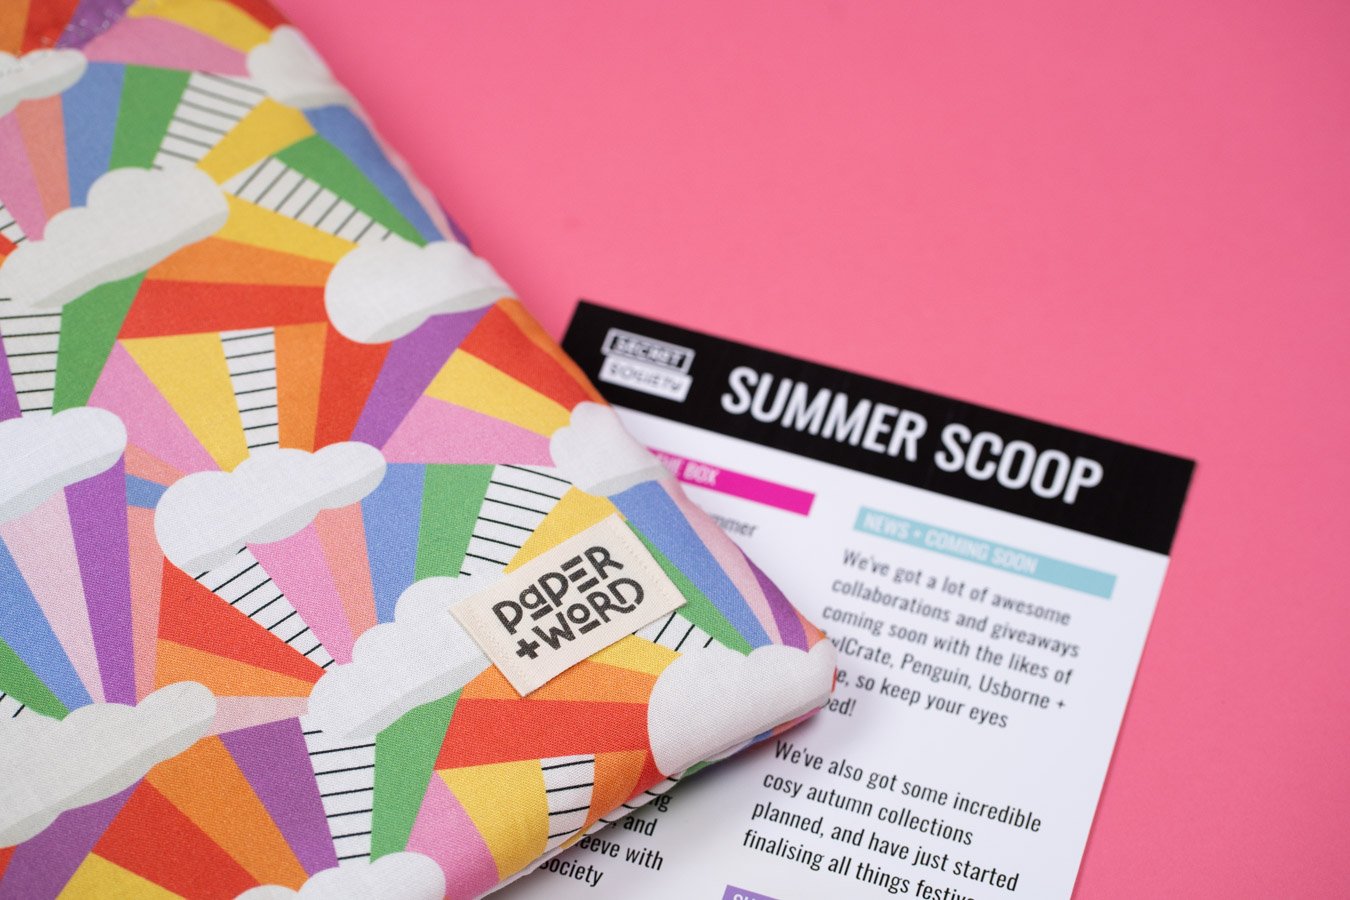 Paper and Word's Secret Society summer membership sleeve. This sleeve has white clouds with rainbow beams. It also shows the summer scoop, which is the membership newsletter